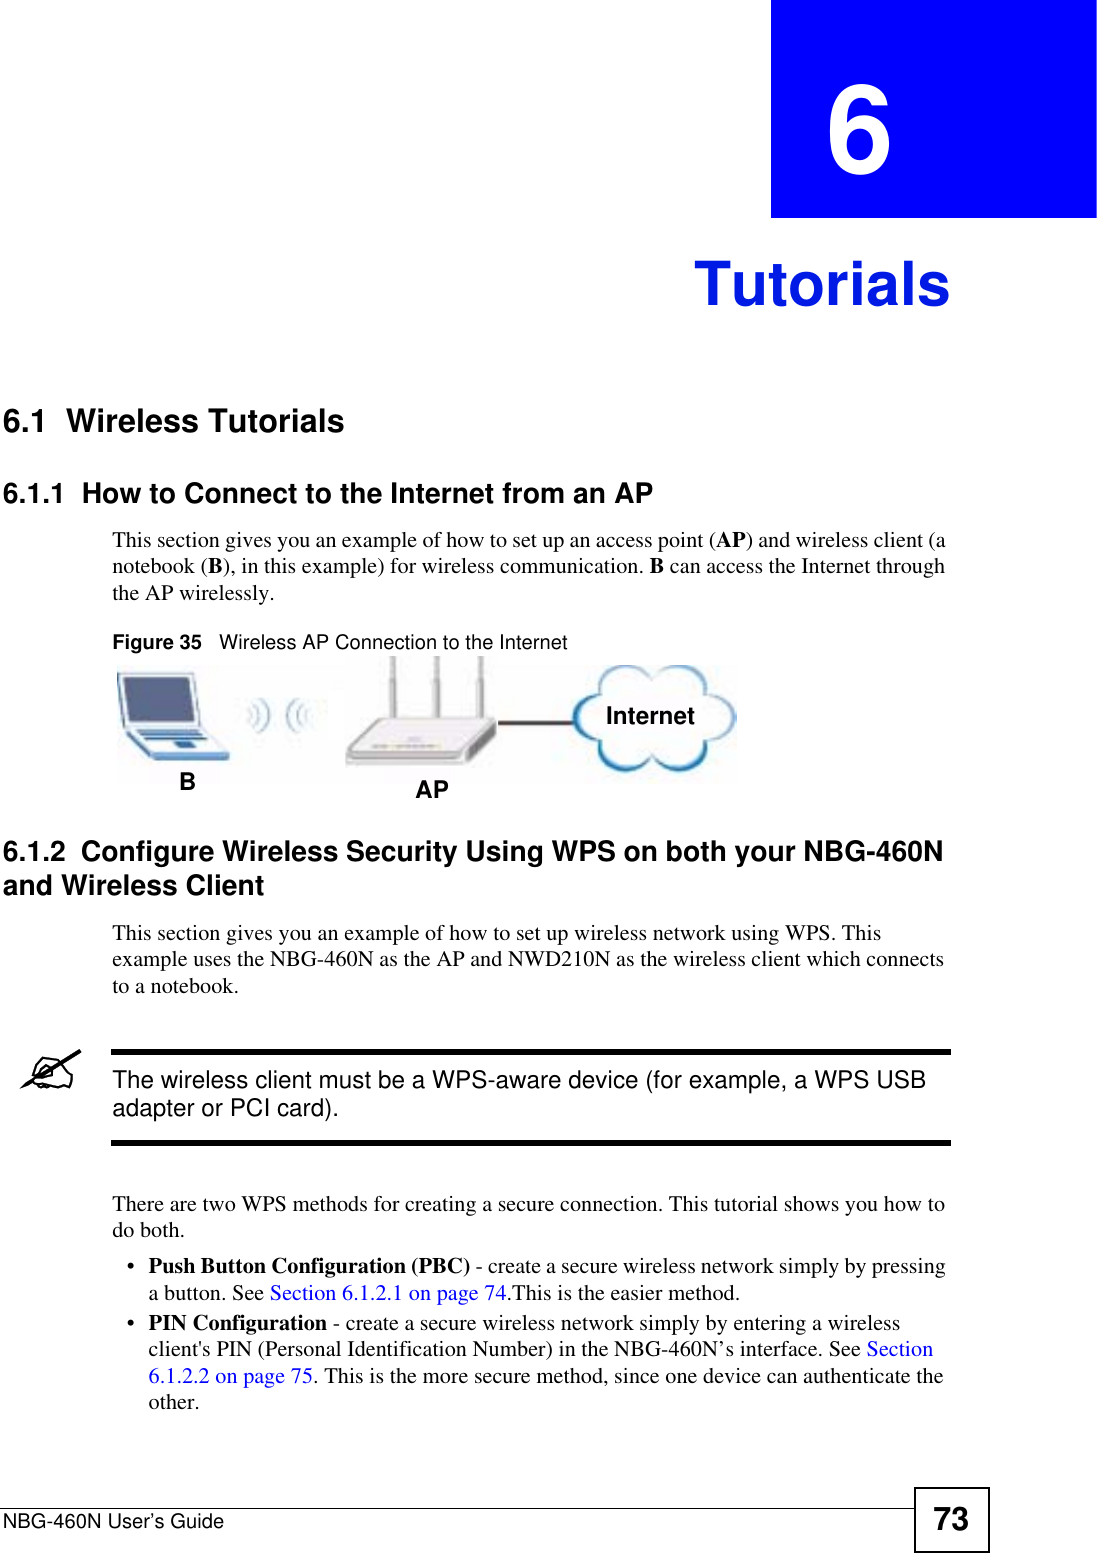 NBG-460N User’s Guide 73CHAPTER  6 Tutorials6.1  Wireless Tutorials6.1.1  How to Connect to the Internet from an APThis section gives you an example of how to set up an access point (AP) and wireless client (a notebook (B), in this example) for wireless communication. B can access the Internet through the AP wirelessly.Figure 35   Wireless AP Connection to the Internet6.1.2  Configure Wireless Security Using WPS on both your NBG-460N and Wireless ClientThis section gives you an example of how to set up wireless network using WPS. This example uses the NBG-460N as the AP and NWD210N as the wireless client which connects to a notebook. &quot;The wireless client must be a WPS-aware device (for example, a WPS USB adapter or PCI card).There are two WPS methods for creating a secure connection. This tutorial shows you how to do both.•Push Button Configuration (PBC) - create a secure wireless network simply by pressing a button. See Section 6.1.2.1 on page 74.This is the easier method.•PIN Configuration - create a secure wireless network simply by entering a wireless client&apos;s PIN (Personal Identification Number) in the NBG-460N’s interface. See Section 6.1.2.2 on page 75. This is the more secure method, since one device can authenticate the other.BAPInternet